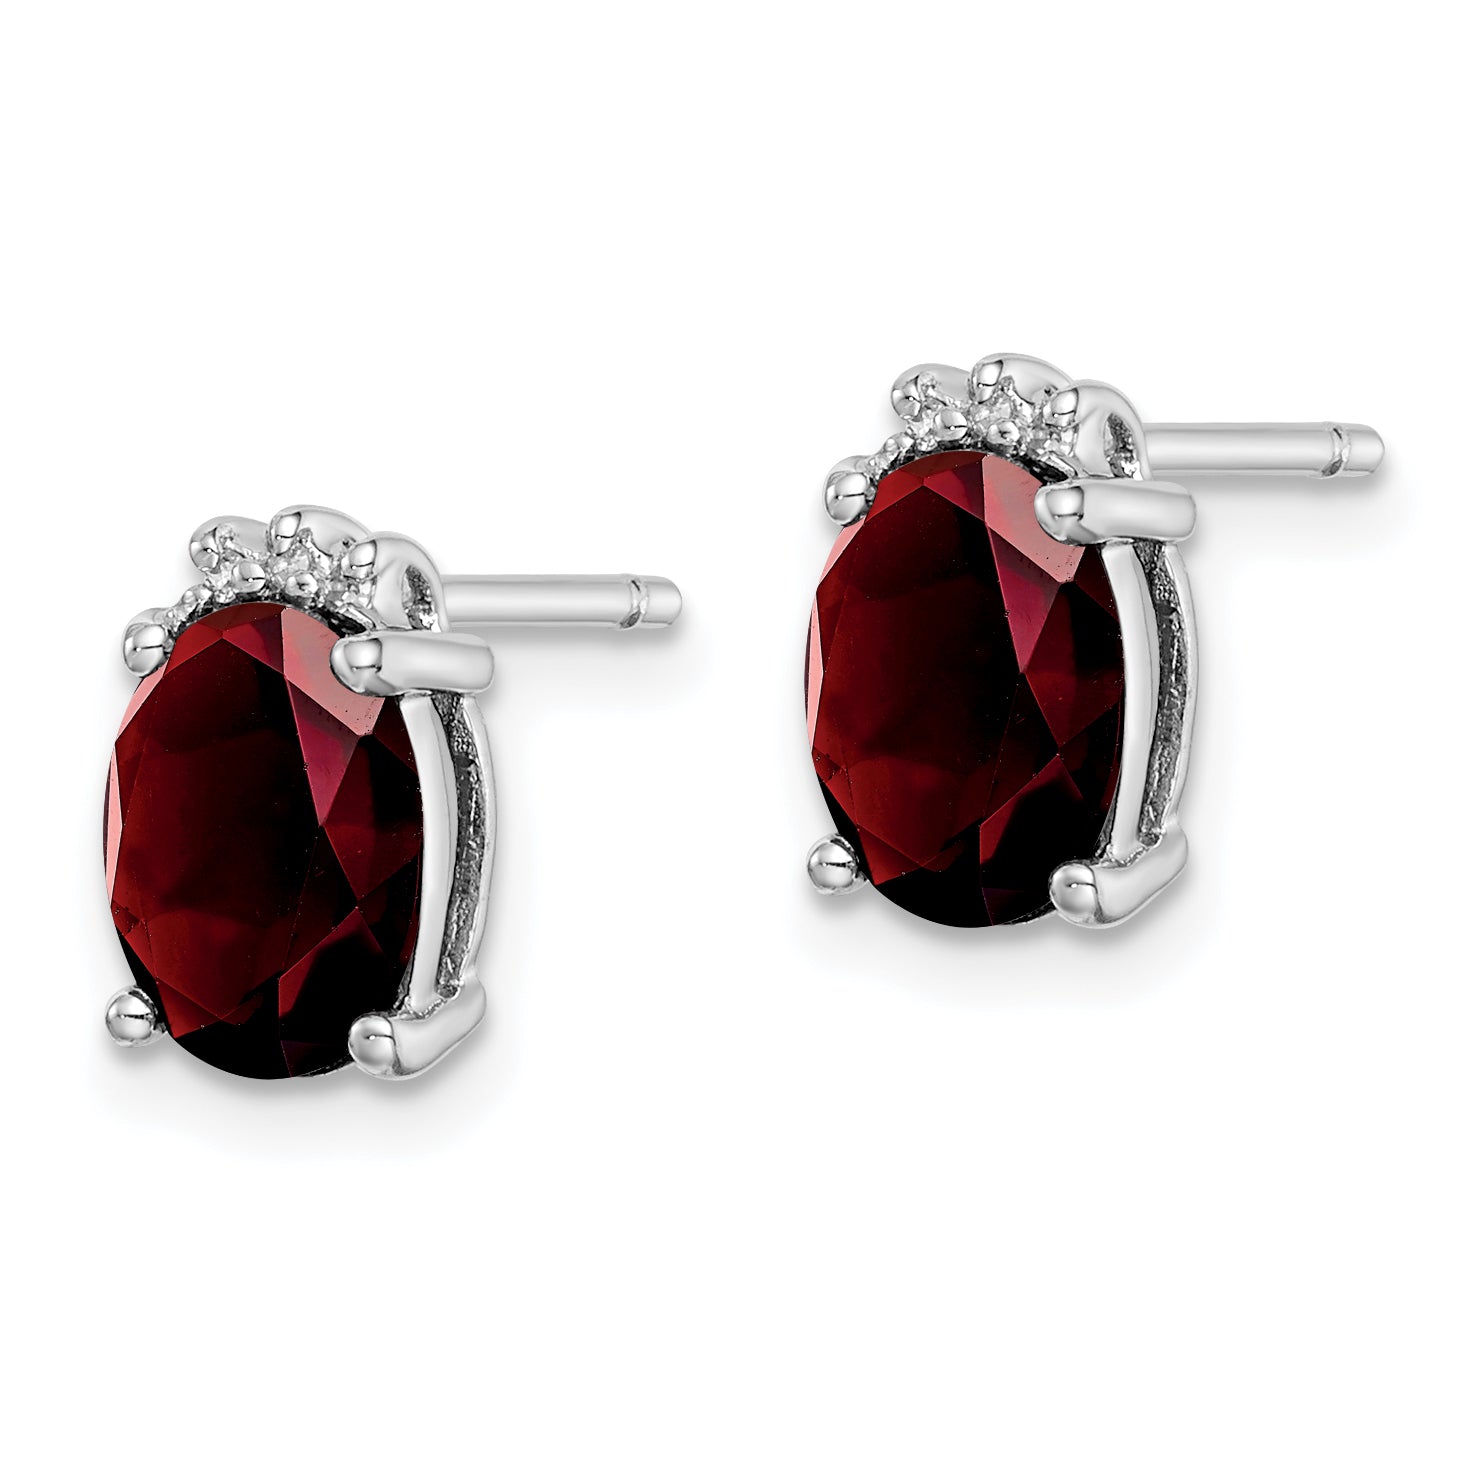 Sterling Silver Rhodium Plated Oval Garnet and Diamond Post Earrings